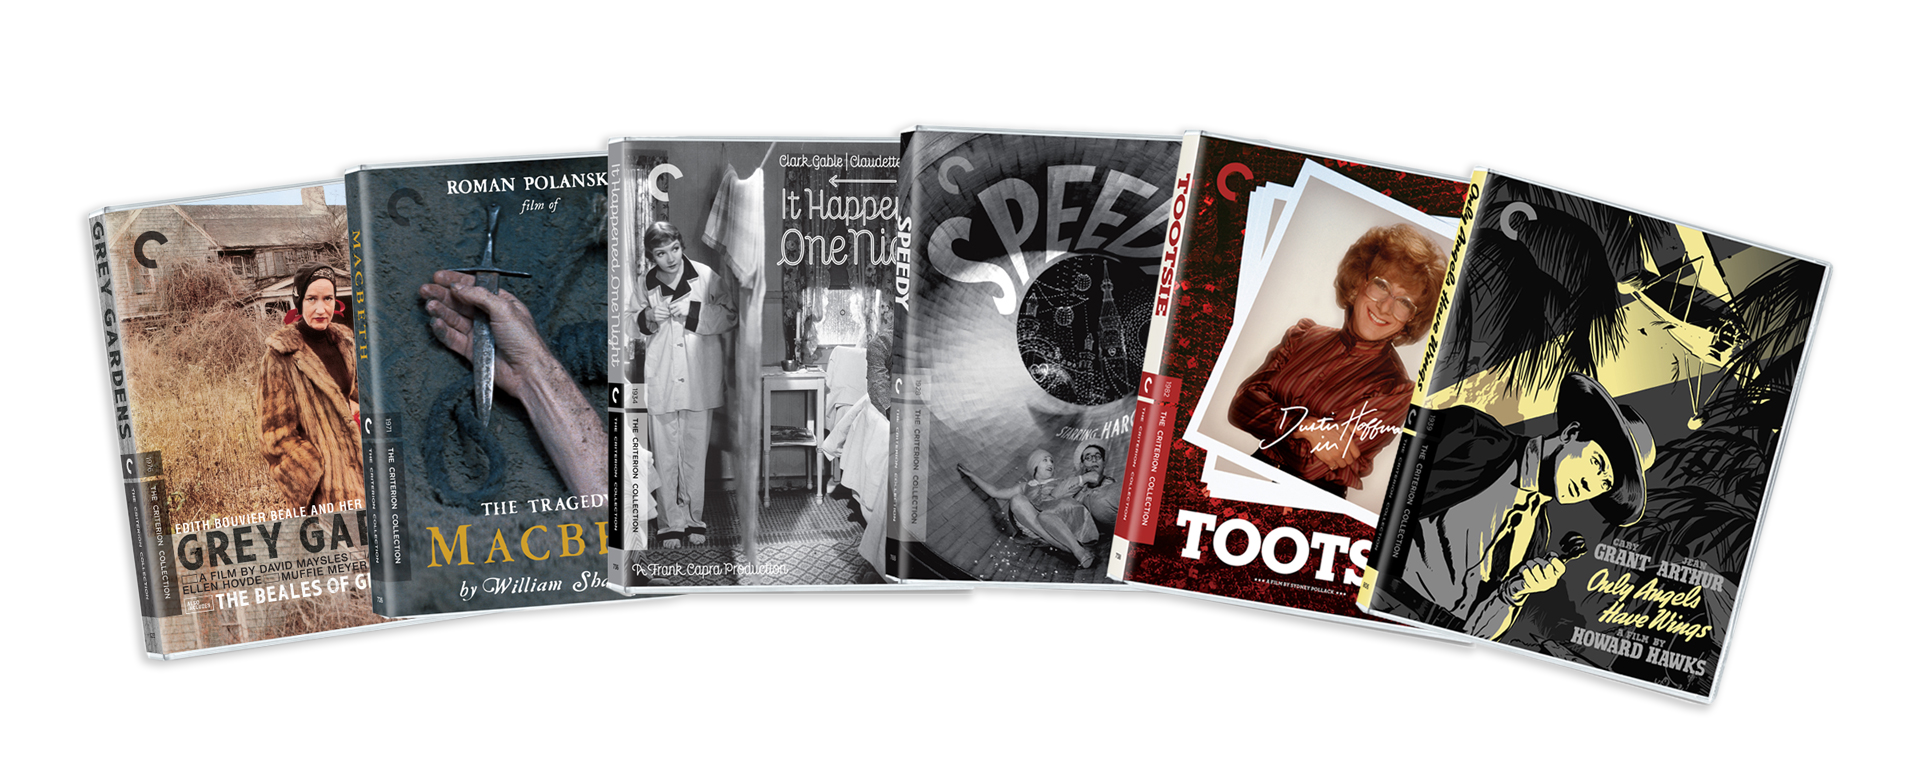 Win a bundle of films from the Criterion Collection Competition